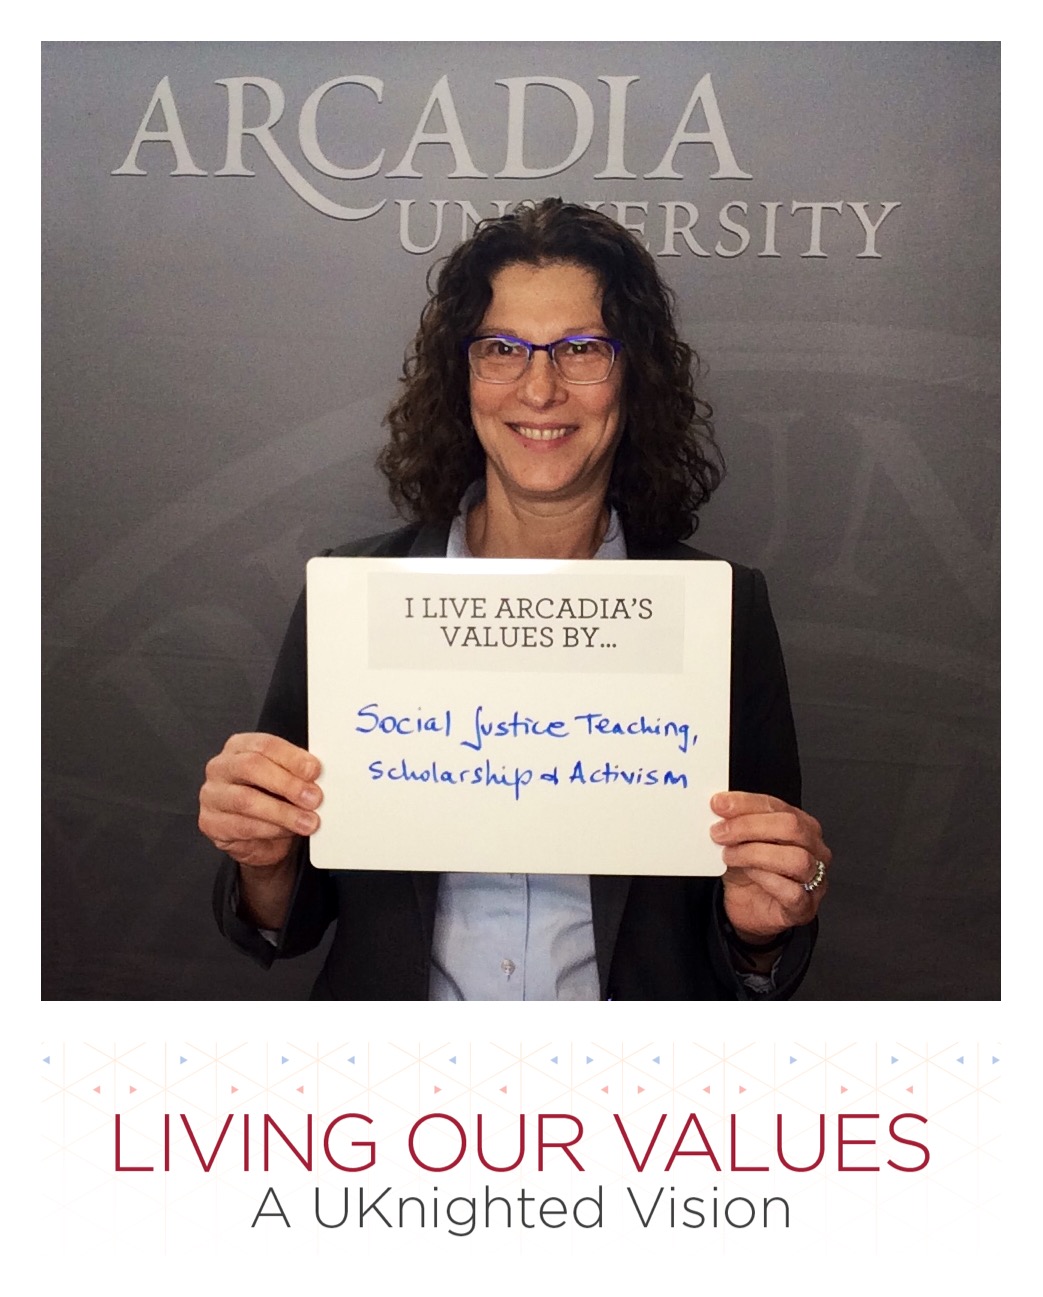 An Arcadia professor showing the values they teach and show to their students.